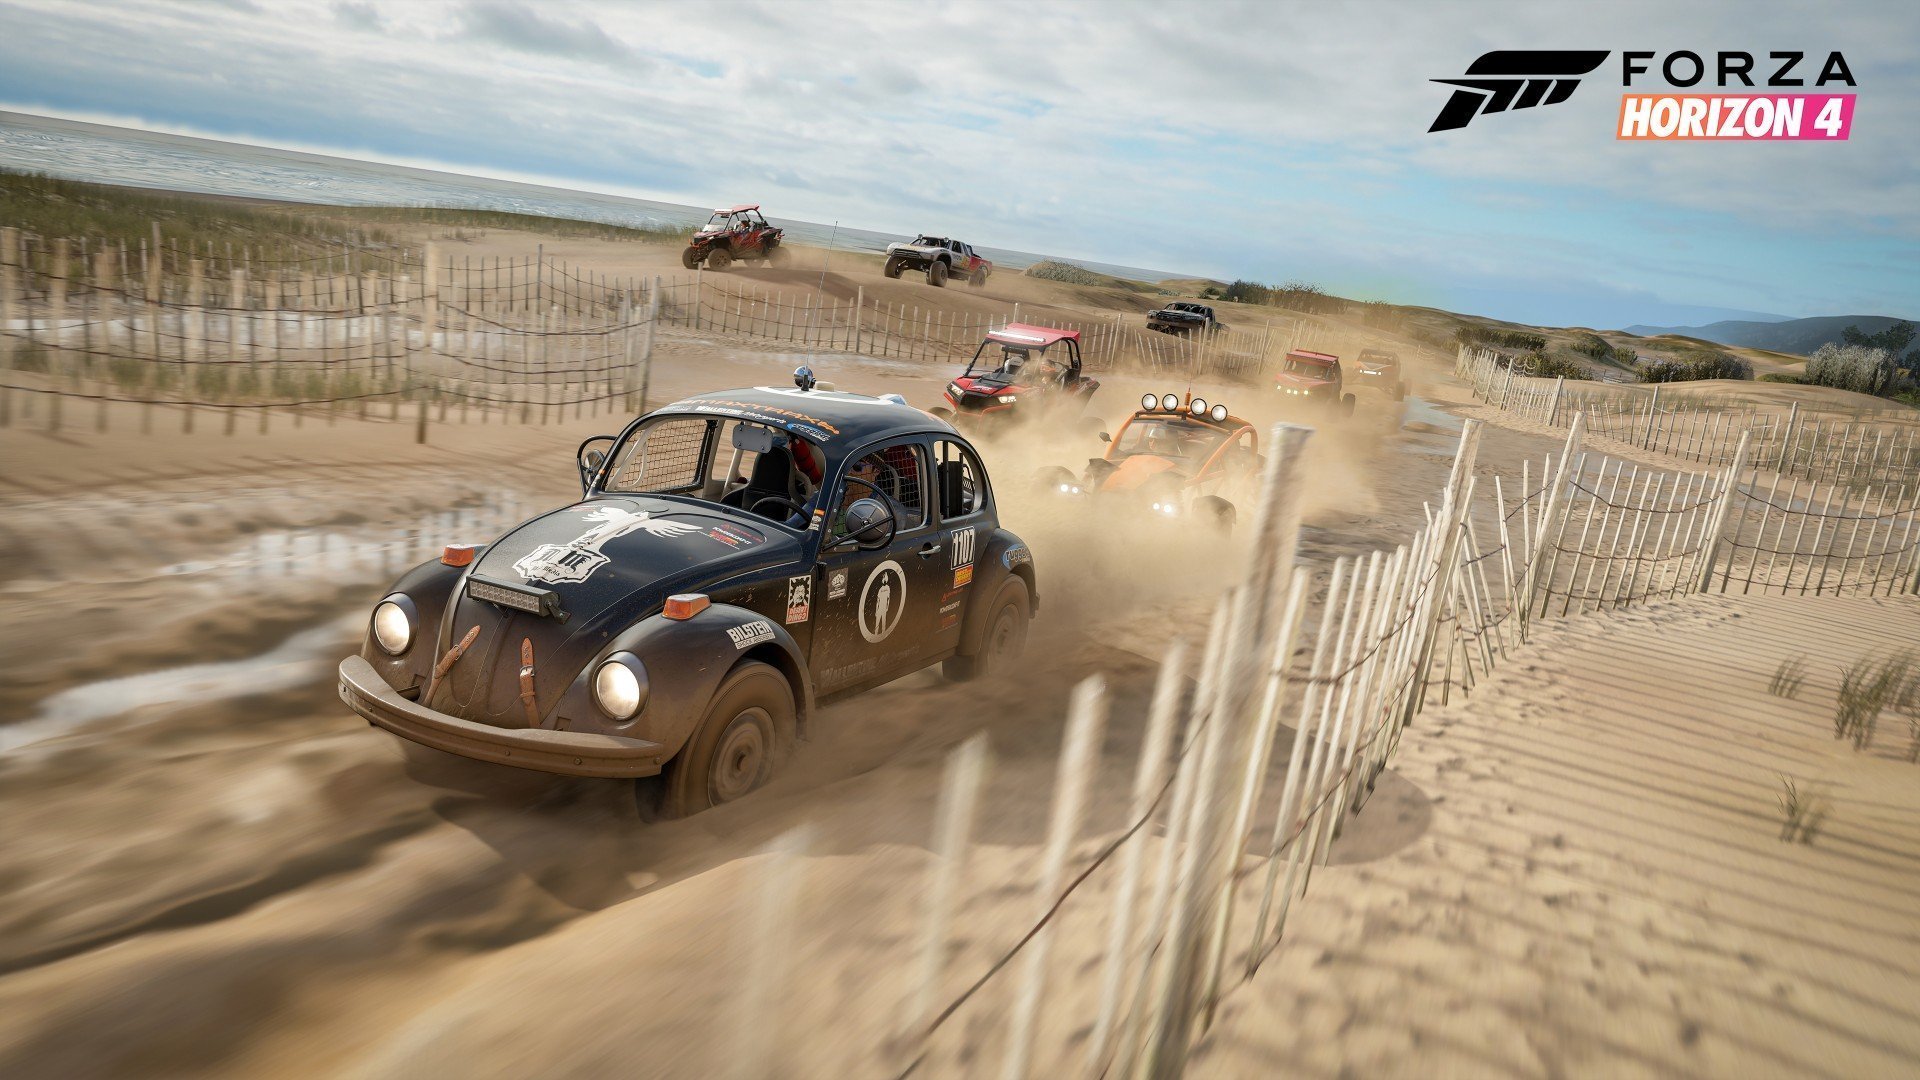 Forza Horizon 4 Demo is now available for free on Windows 10 and Xbox One Forza-Horizon-4_Beach-Bums-1.jpg